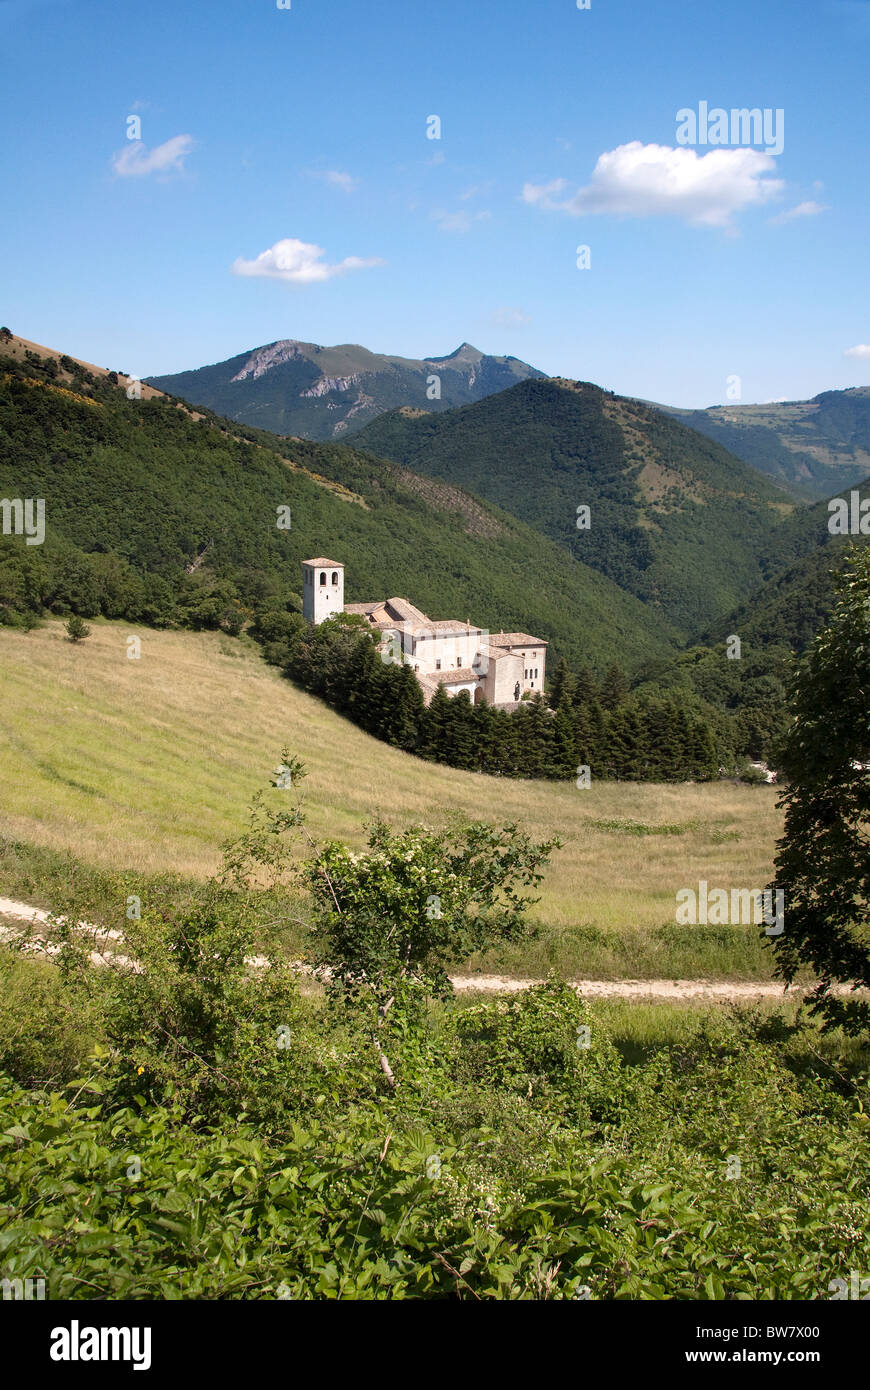 The Abbey of Fonte Avellana hidden in the Appenine Mountains of Le Marche, Italy Stock Photo